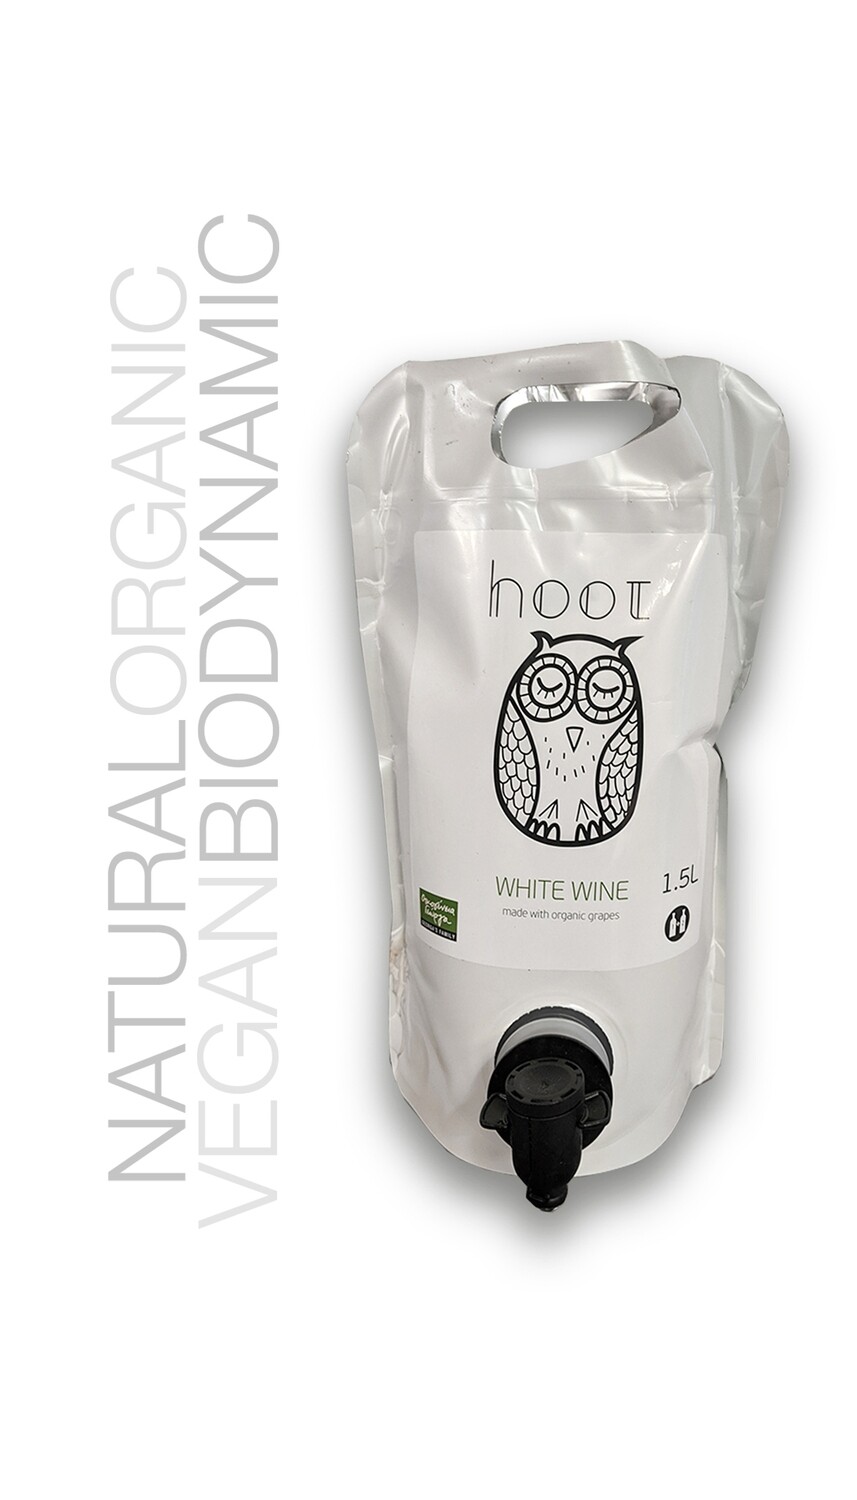 Georgas Family Hoot White Wine Blend 1.5L Pouch 